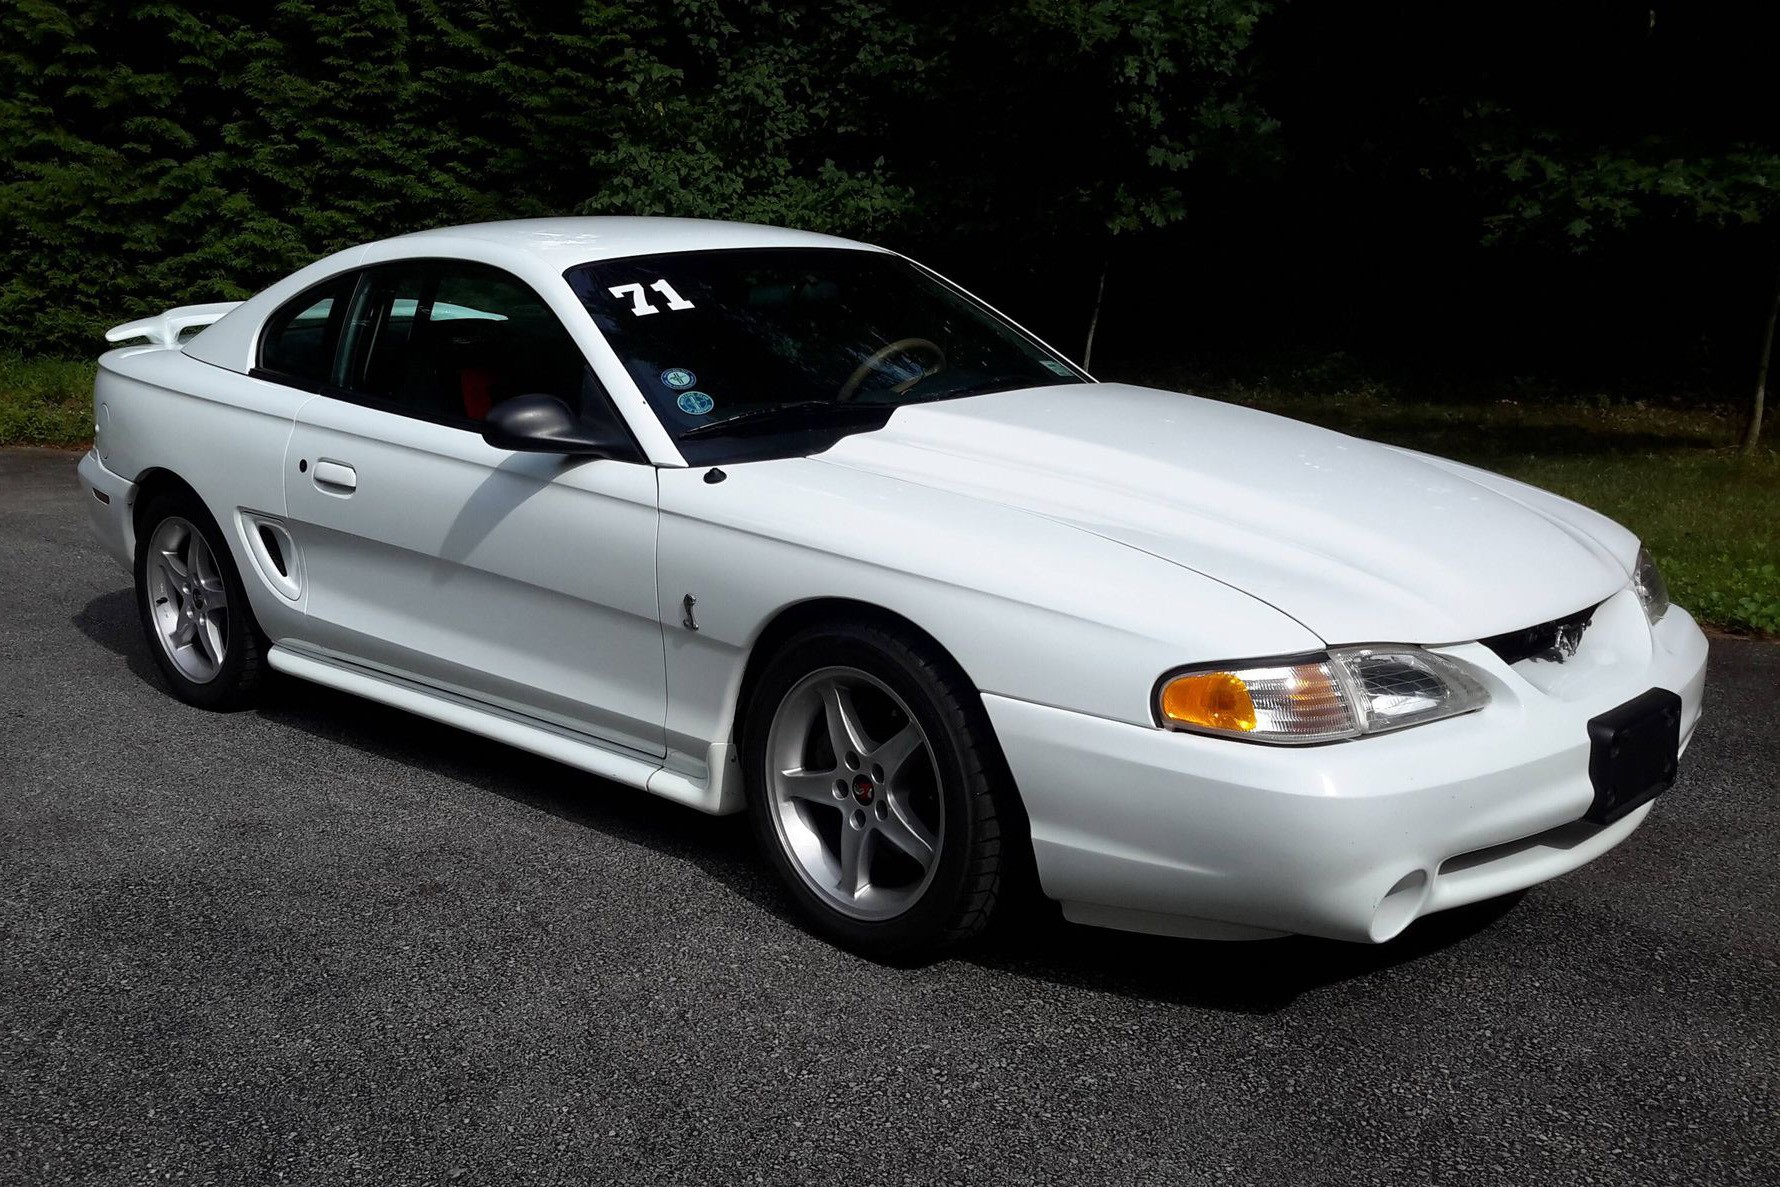 Now Available without a Racing License: 1995 Ford Mustang Cobra R